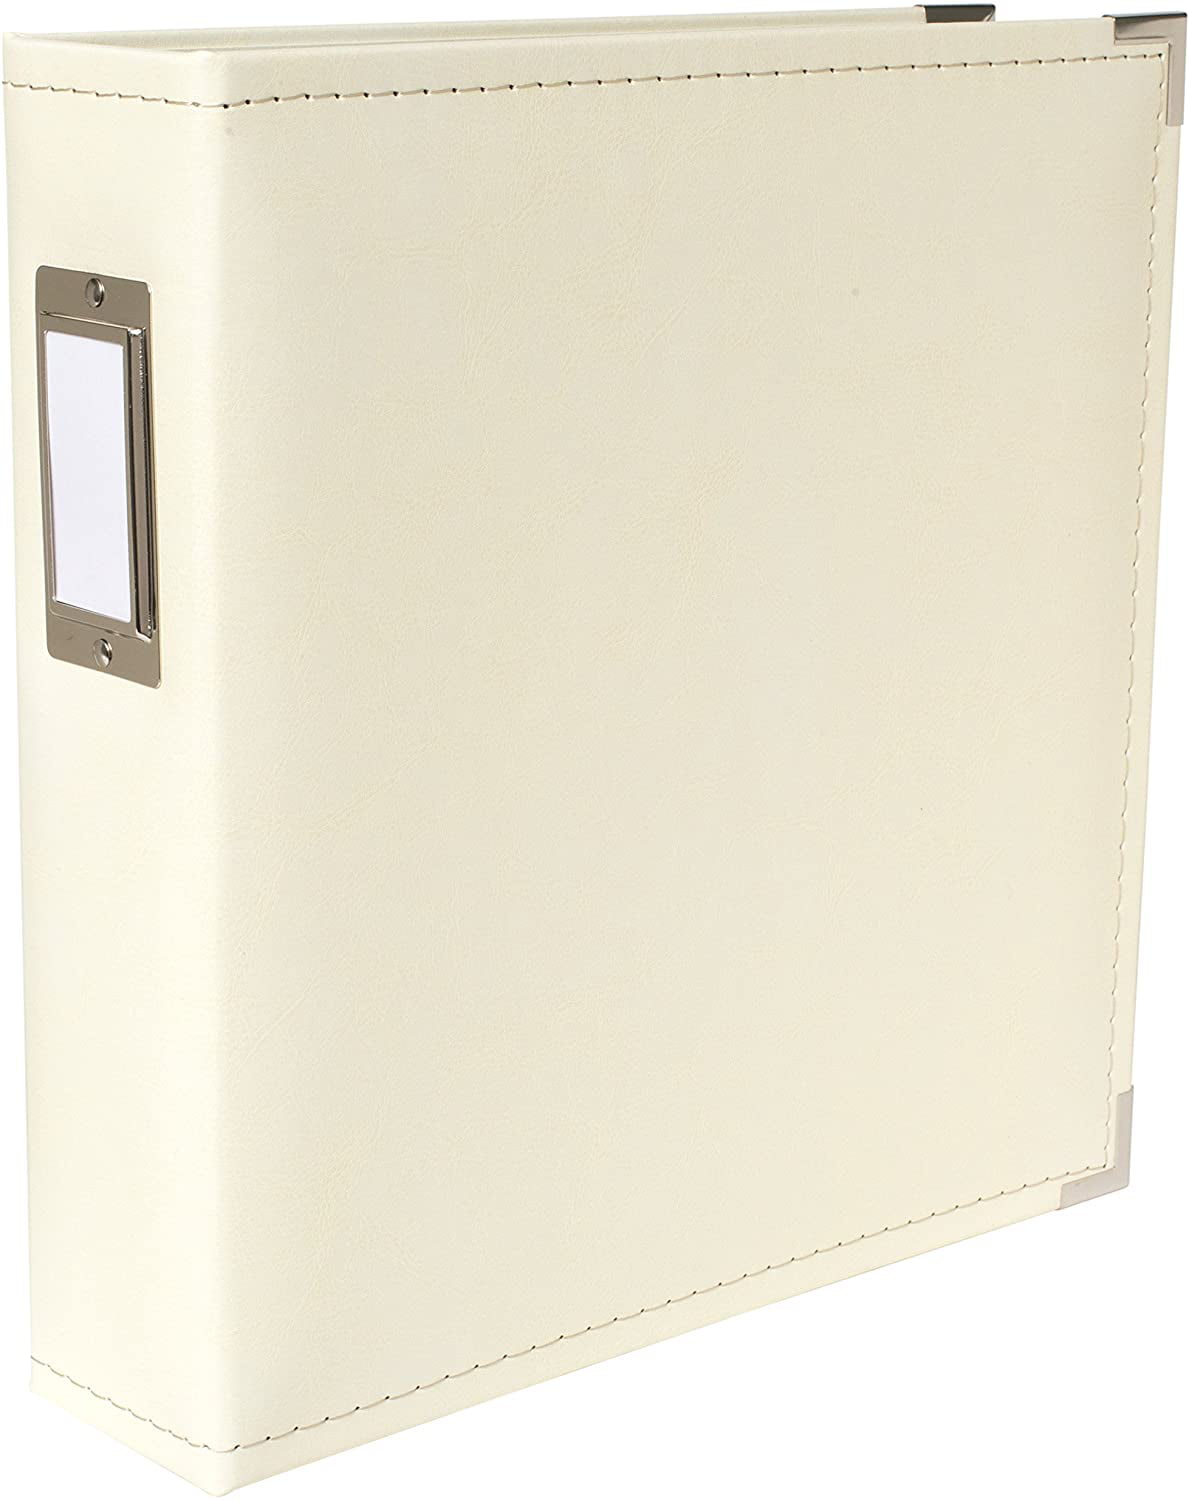 We R Memory Keepers 8-1/2-Inch by 11-Inch Faux Leather 3-Ring Binder Vanilla